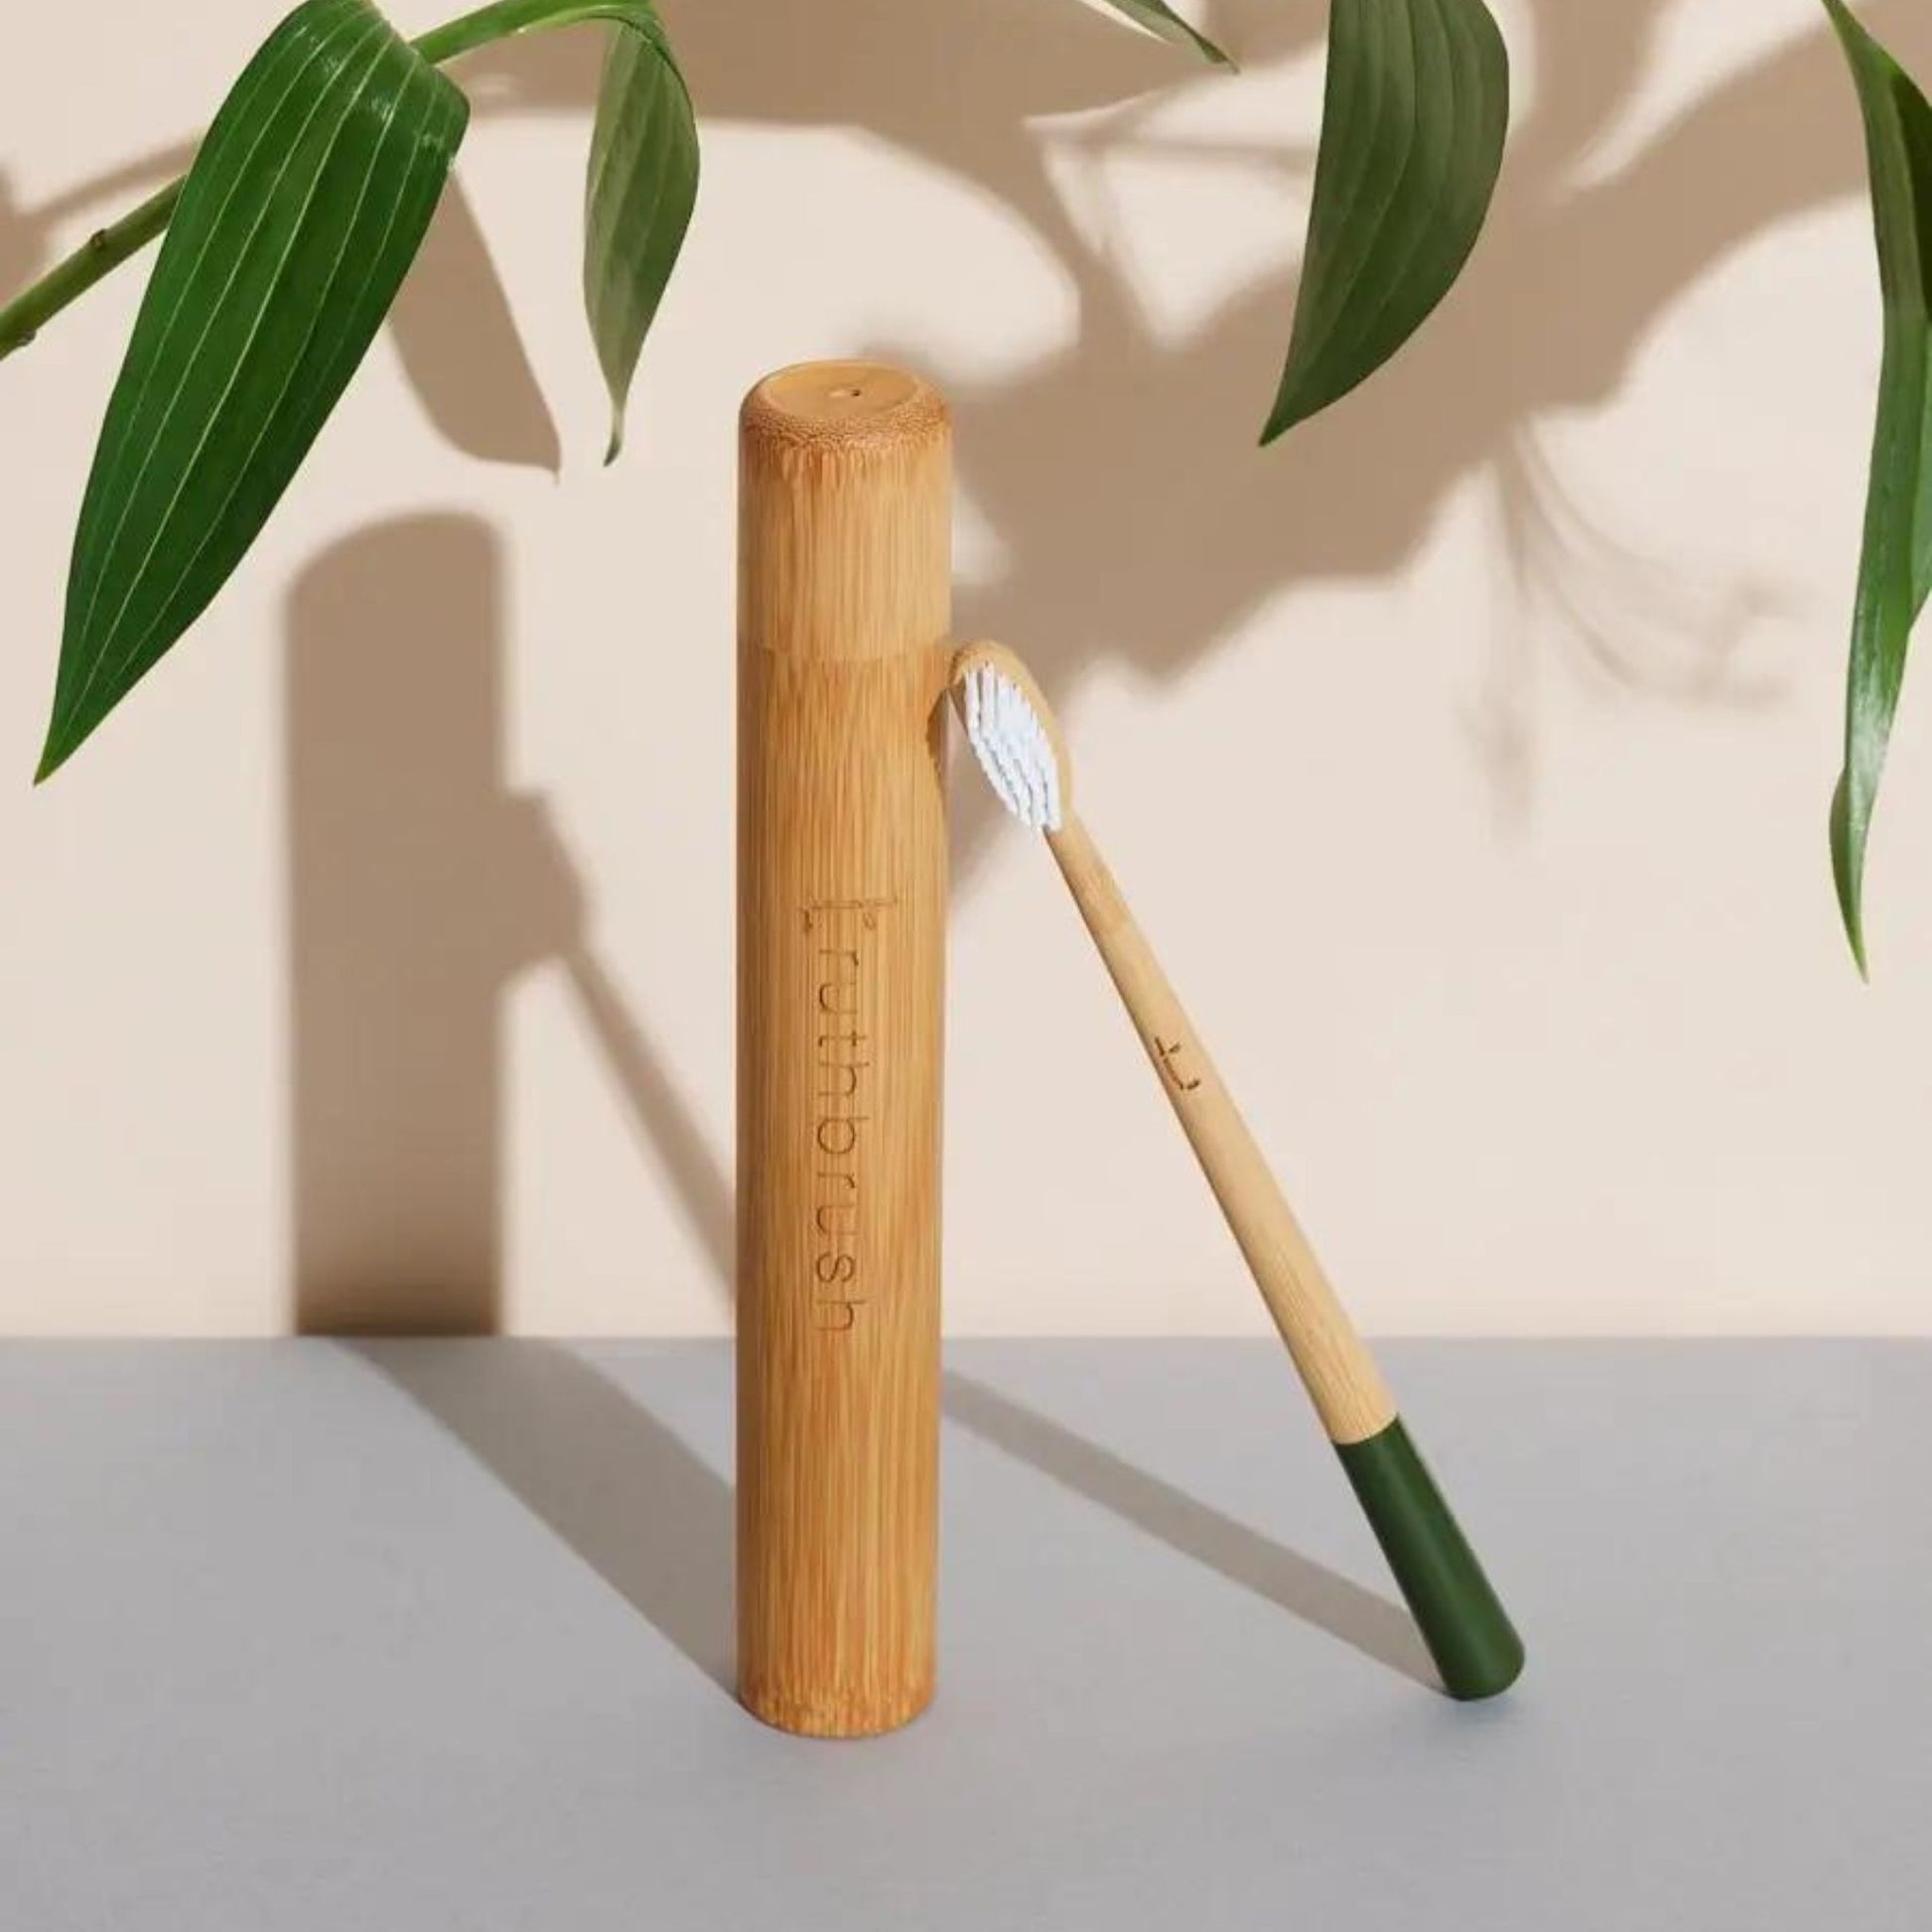 Bamboo Toothbrush Travel Case with a Bamboo Toothbrush